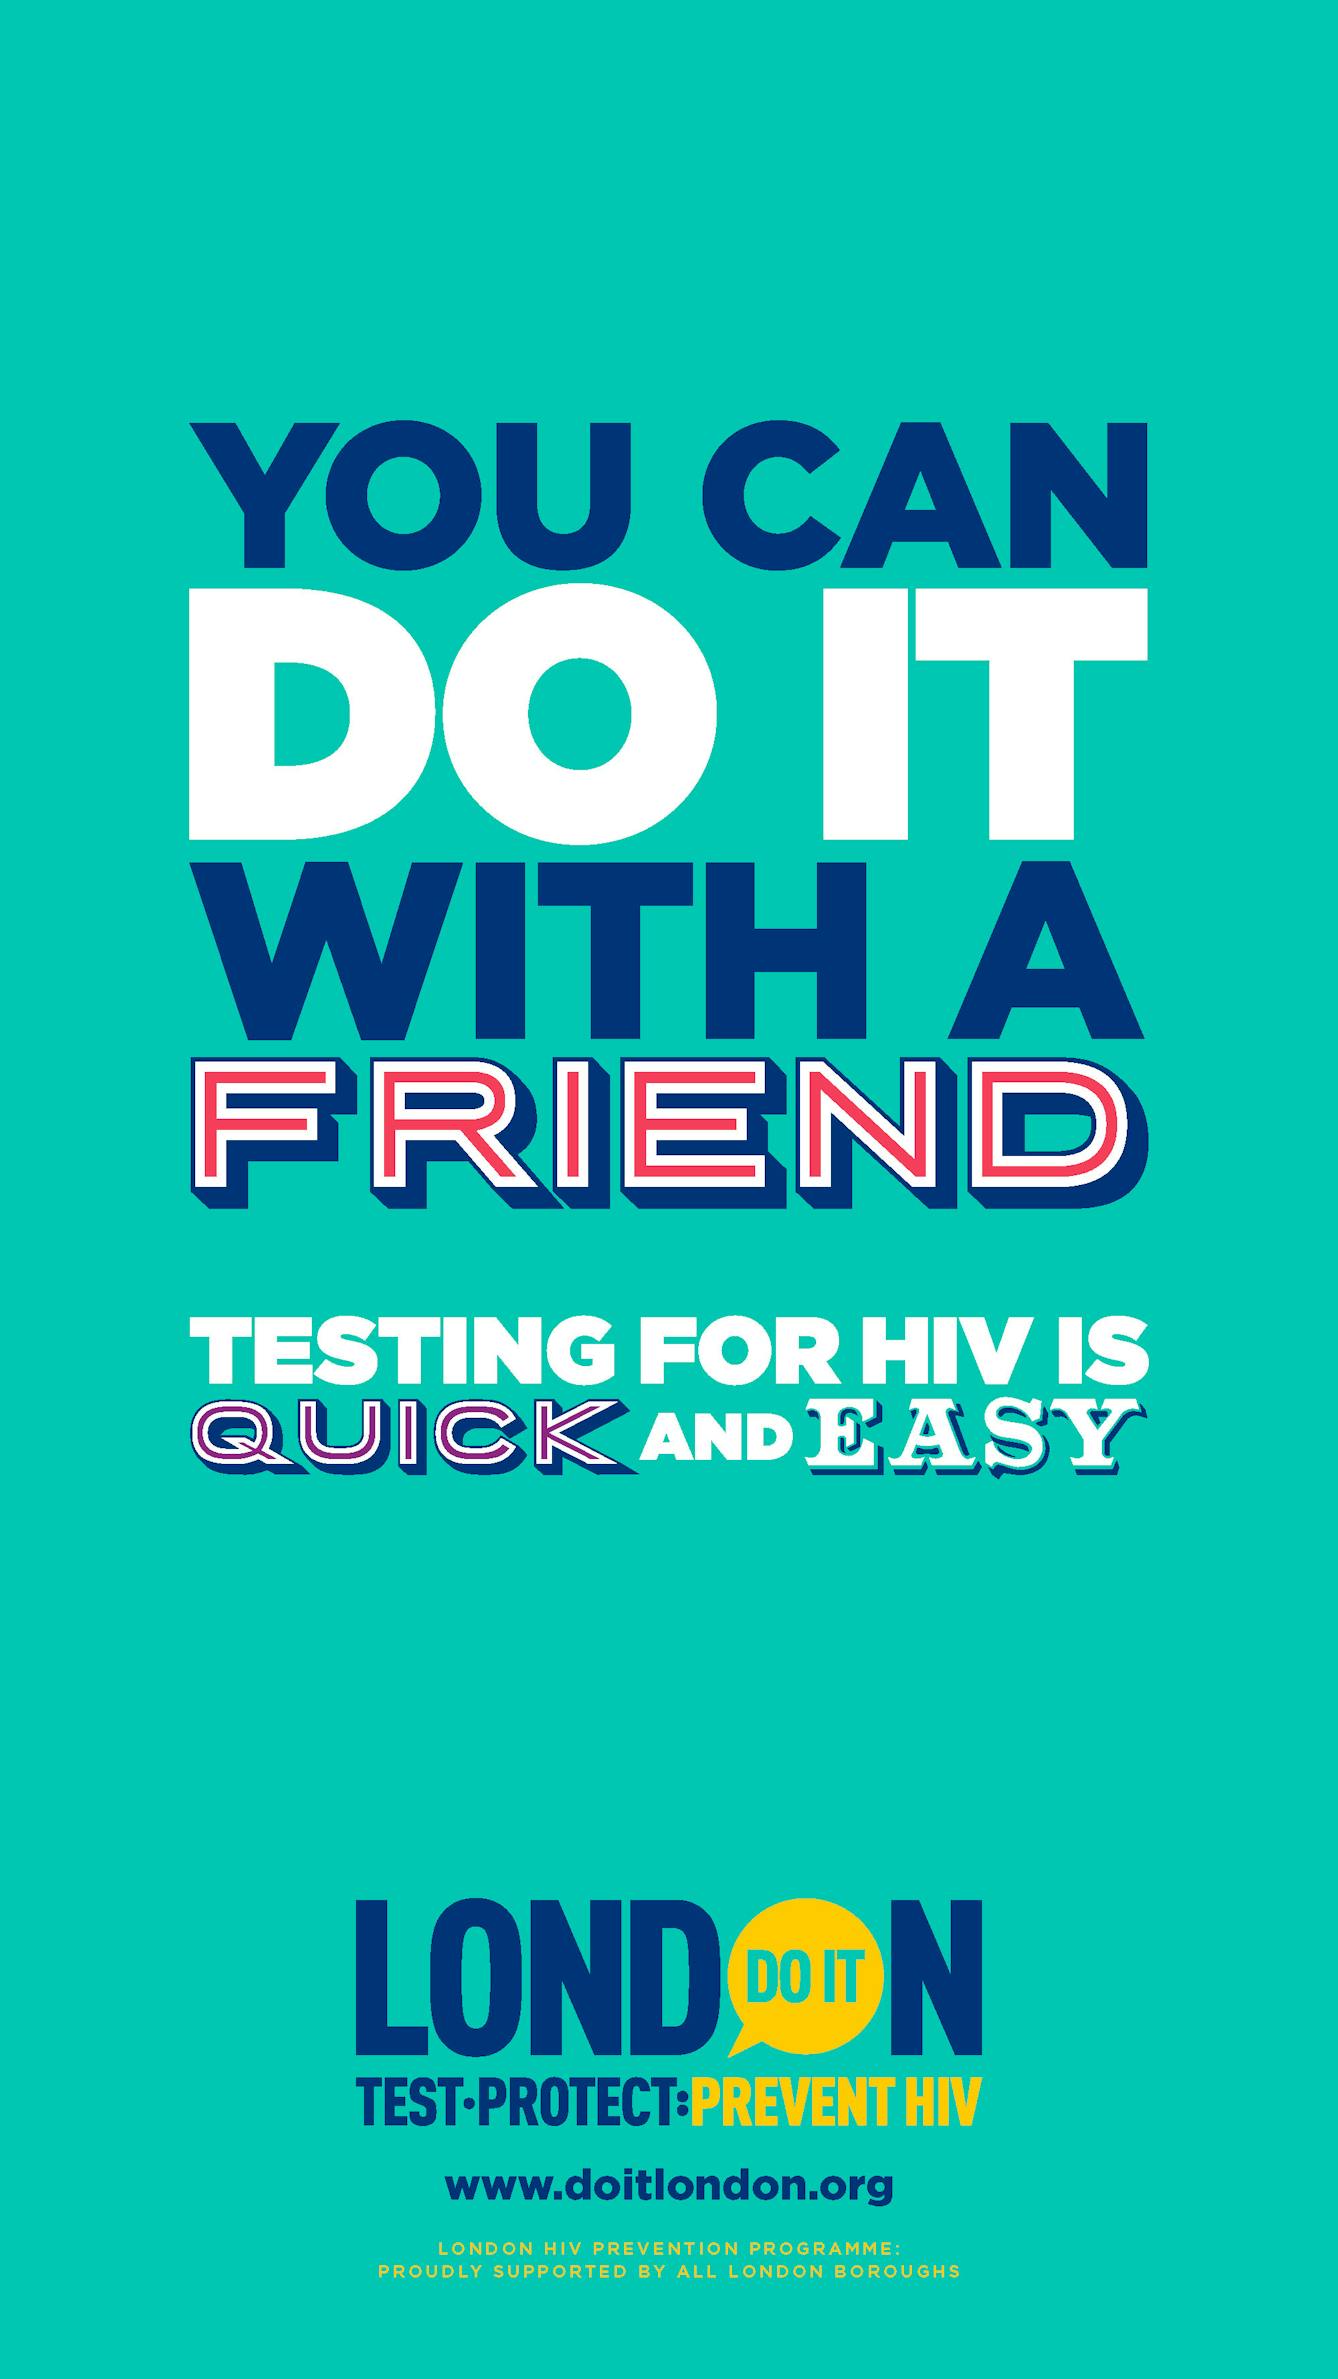 Do It London campaign poster stating "You can do it with a friend. Testing for HIV is quick and easy."